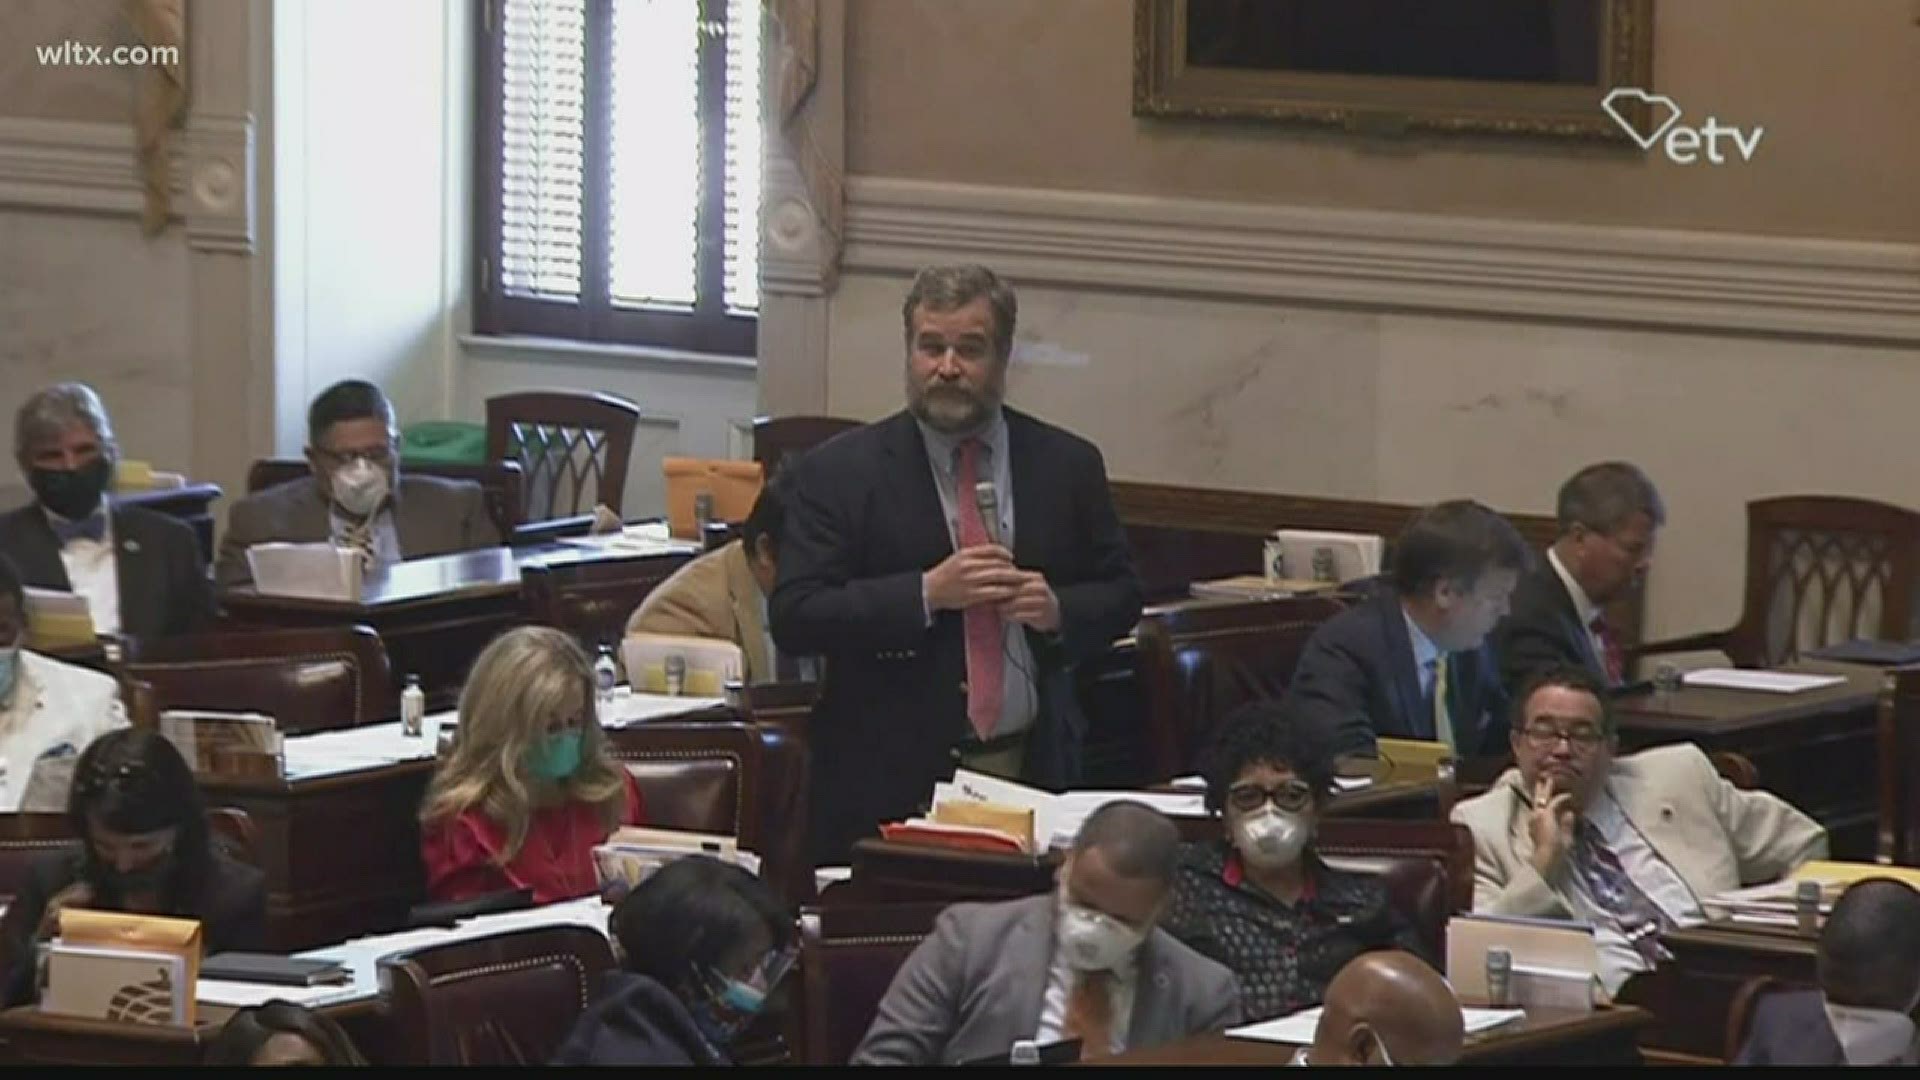 After hours of debate, lawmakers approved a COVID-19 response fund, expanded voting, and prevented a shutdown July 1st.